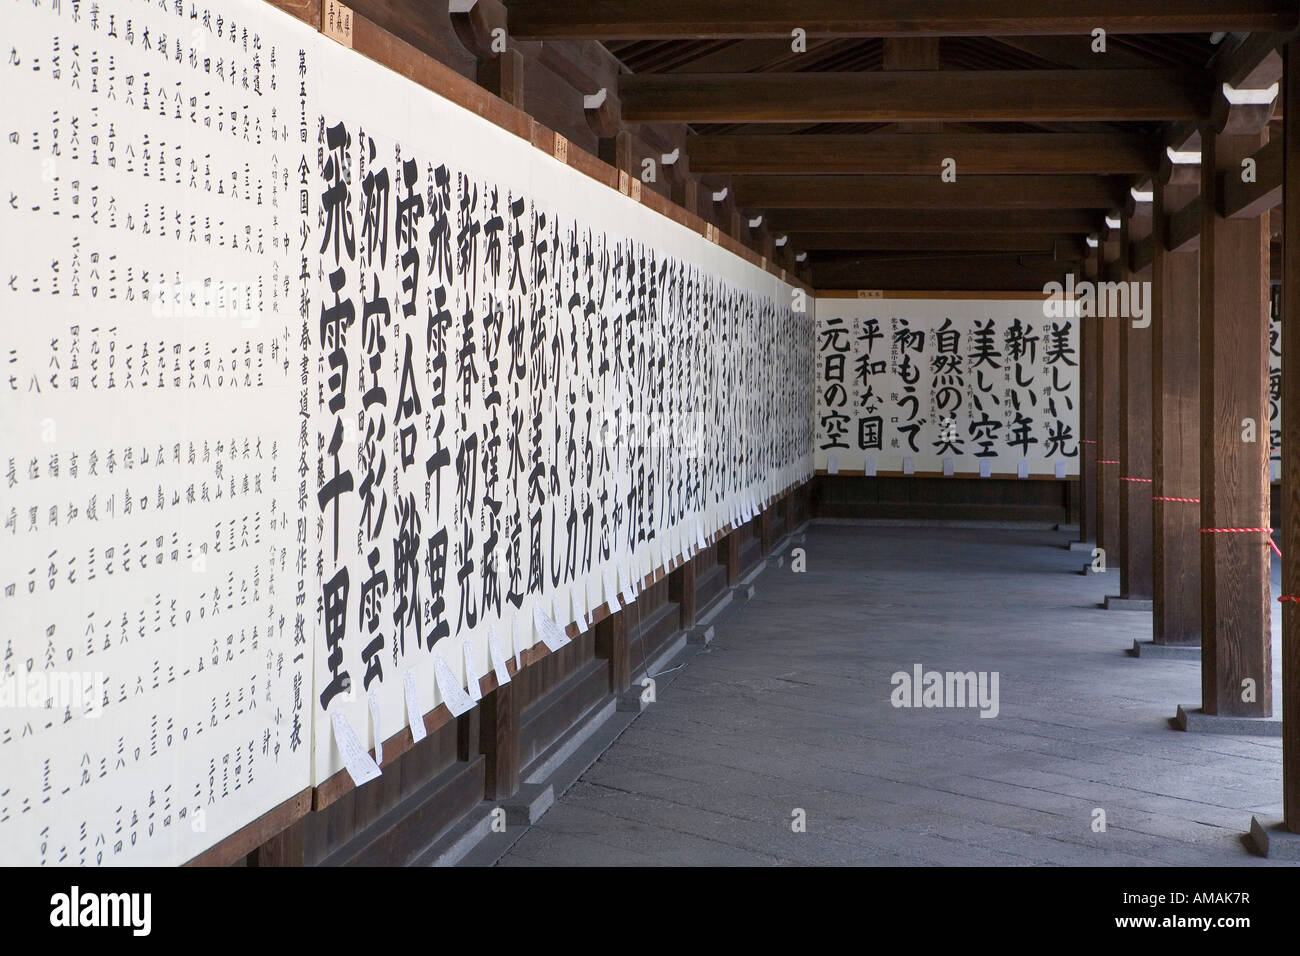 Japanese calligraphy on scrolls hanging in the corridor of a temple Stock Photo